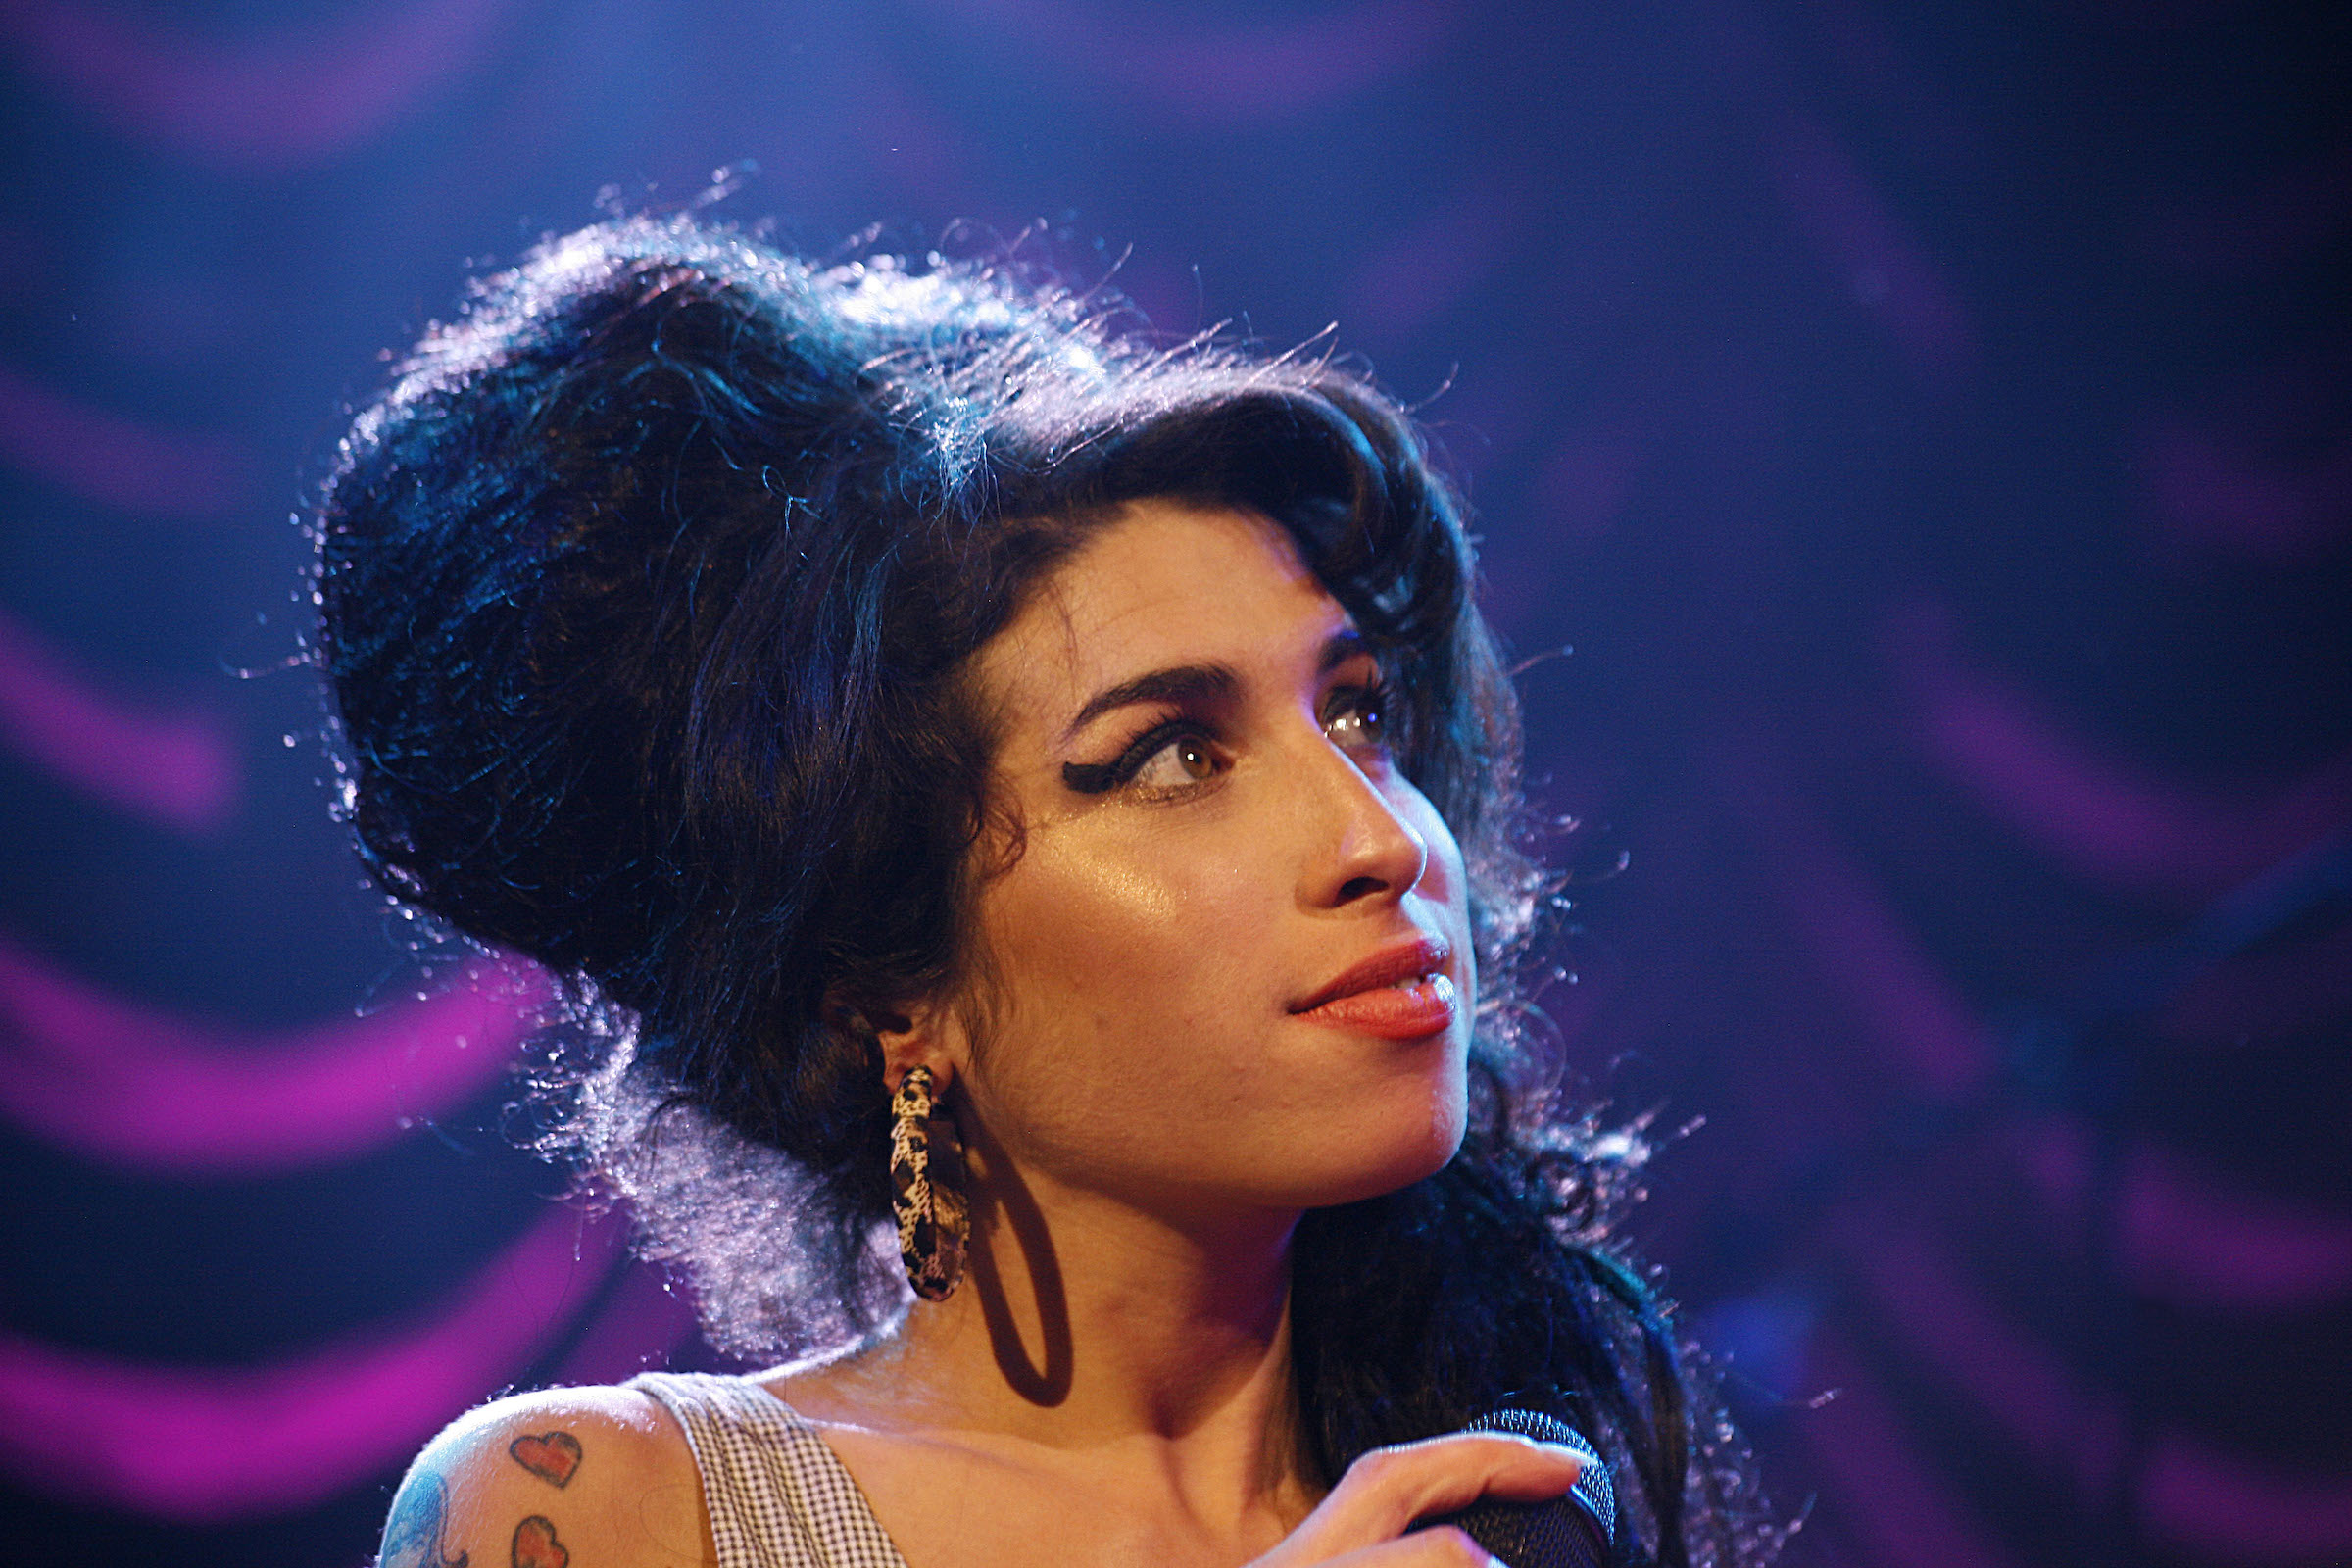 Amy Winehouse, who is the subject of a new biopic